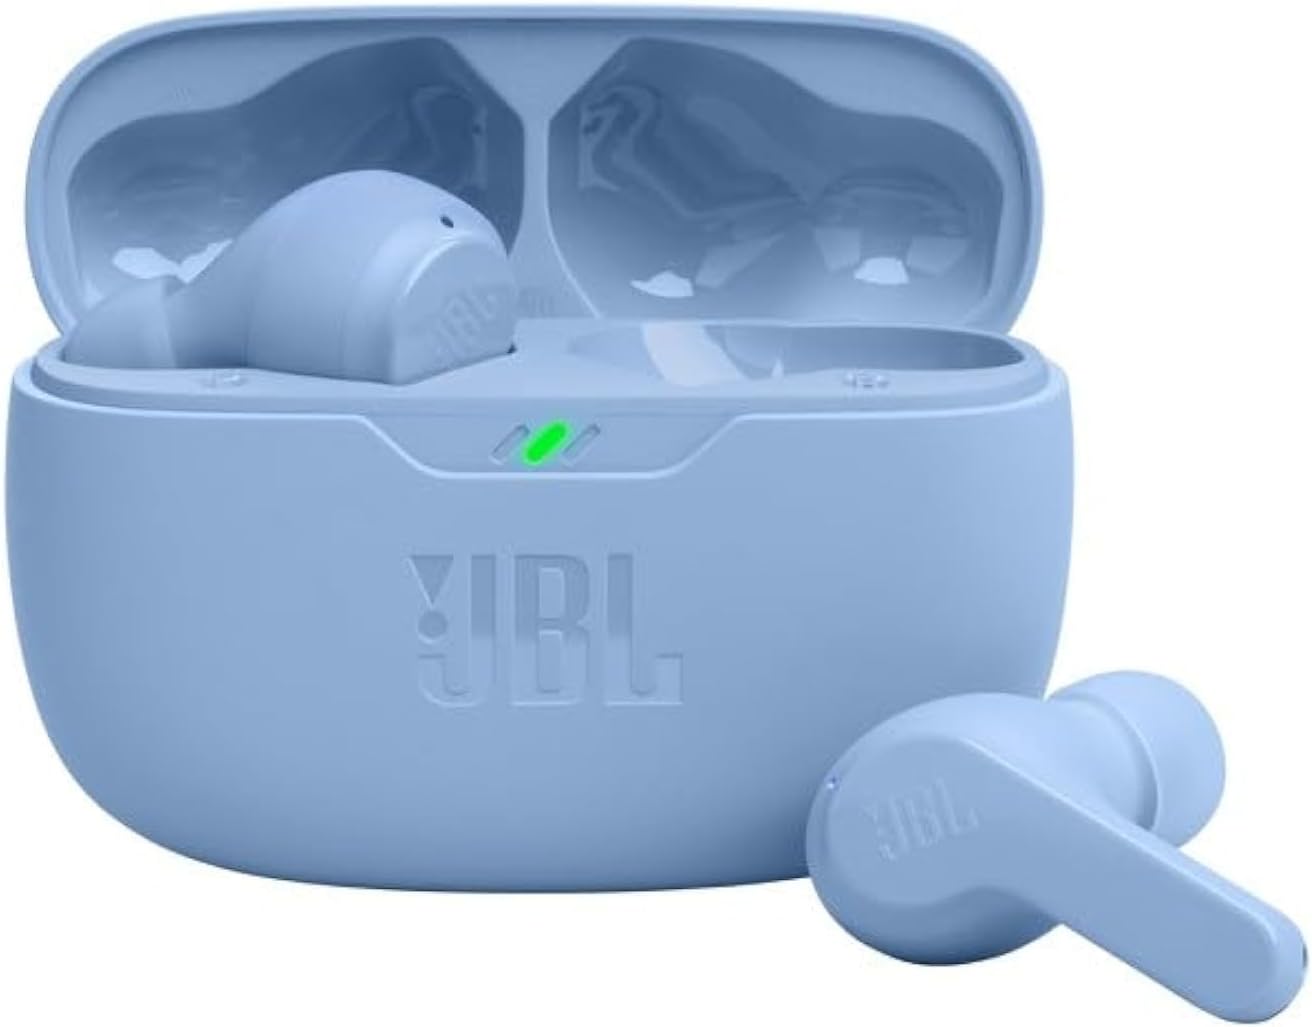 JBL Wave Beam True Wireless Earbuds, High-Quality Audio, Comfort Fit, 32H Battery, Smart Ambient, Hands-Free + VoiceAware, Water And Dust Resistant